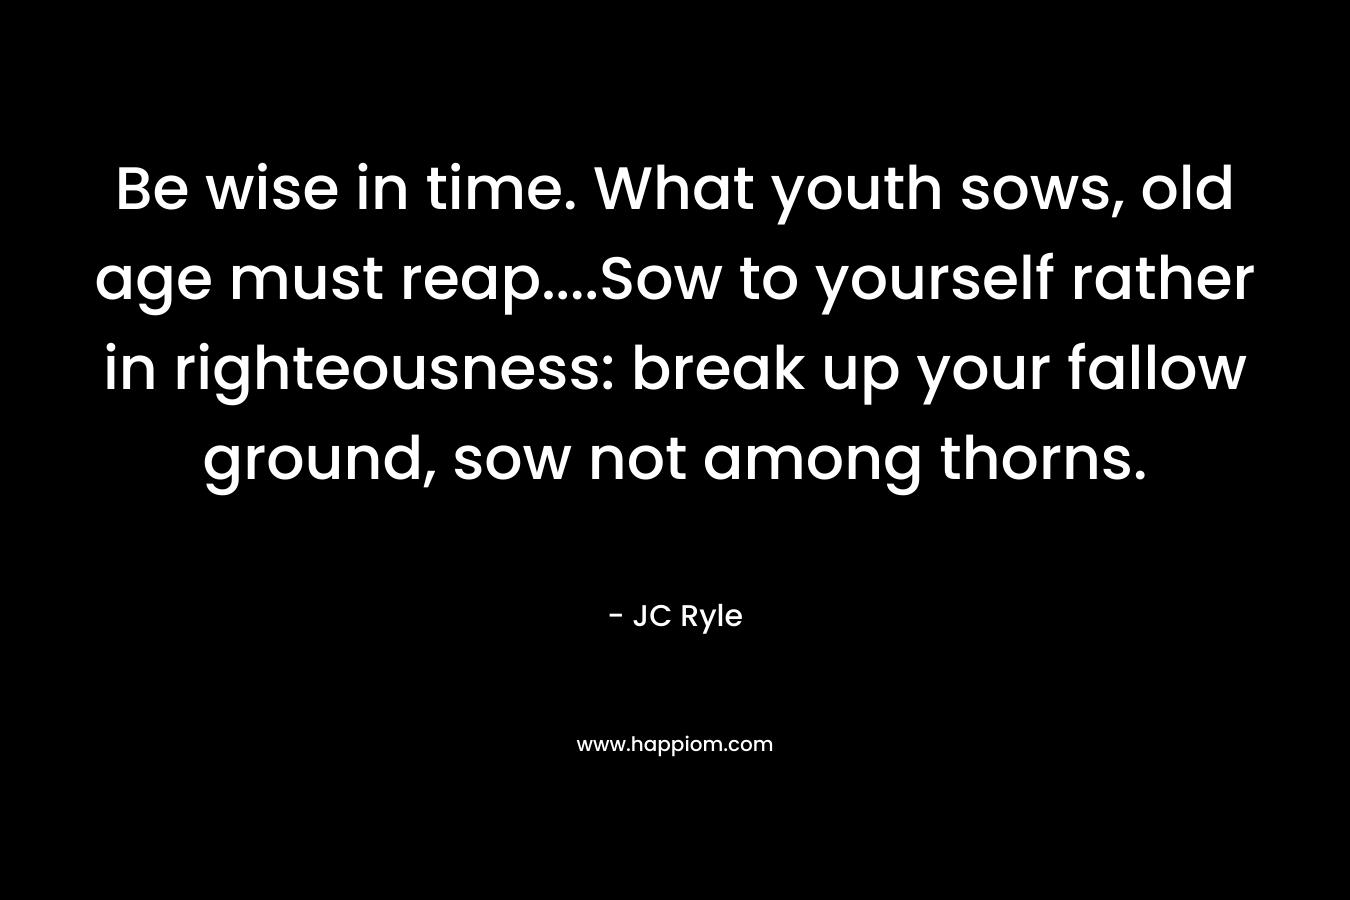 Be wise in time. What youth sows, old age must reap....Sow to yourself rather in righteousness: break up your fallow ground, sow not among thorns.